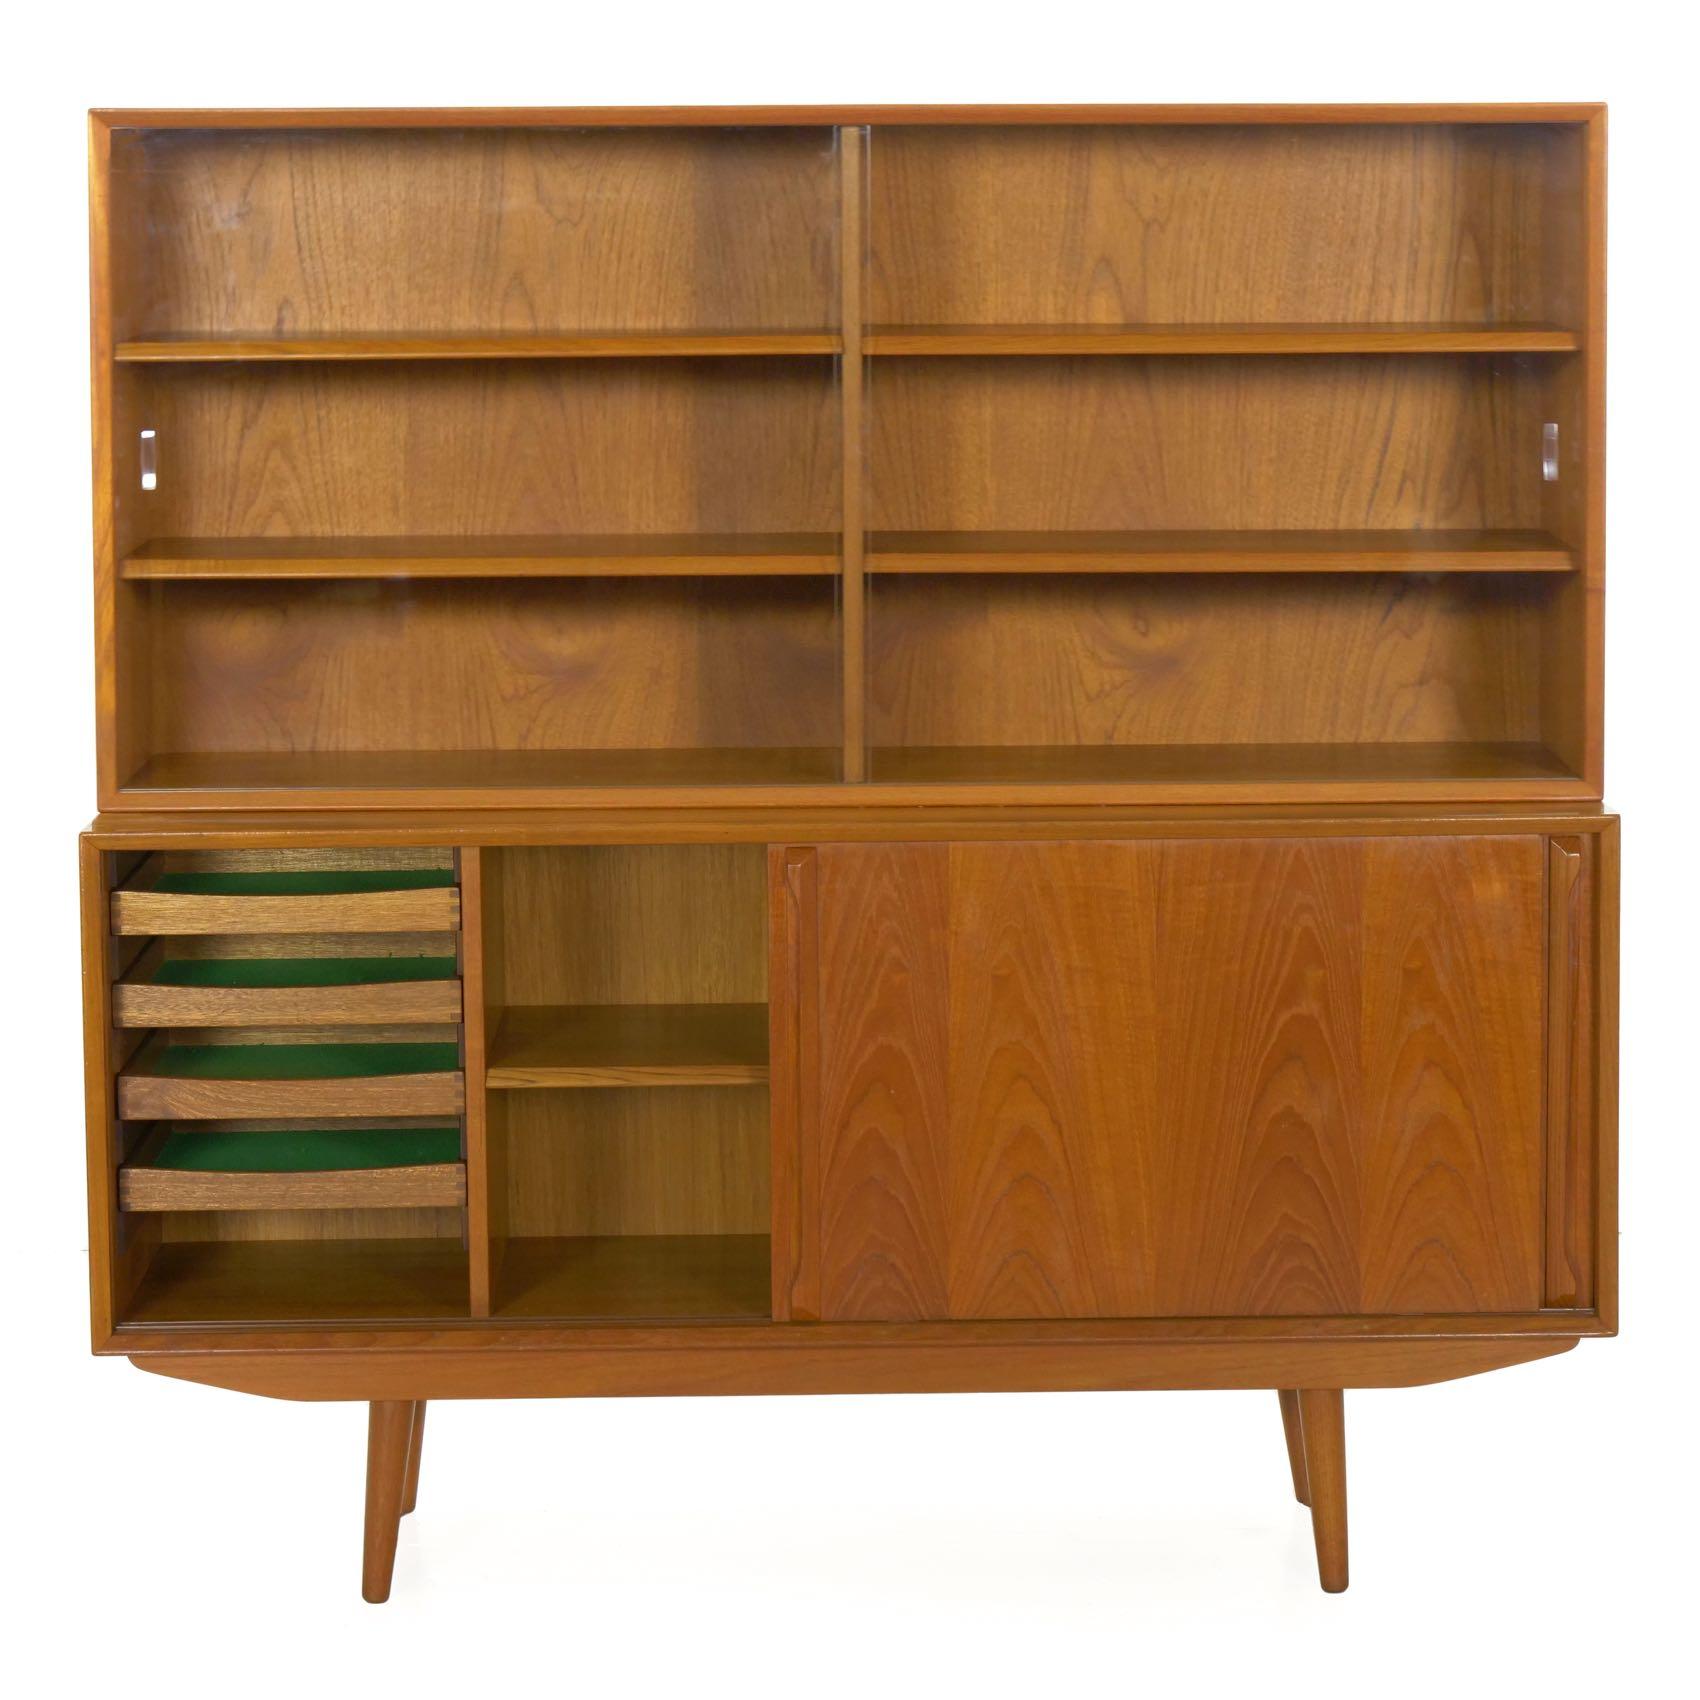 A very high quality and sleek bookcase cabinet situated over a credenza, the bookcase separates into three parts: the base, the credenza and the upper bookcase. This has likely allowed the piece to remain in its overall excellent condition over the